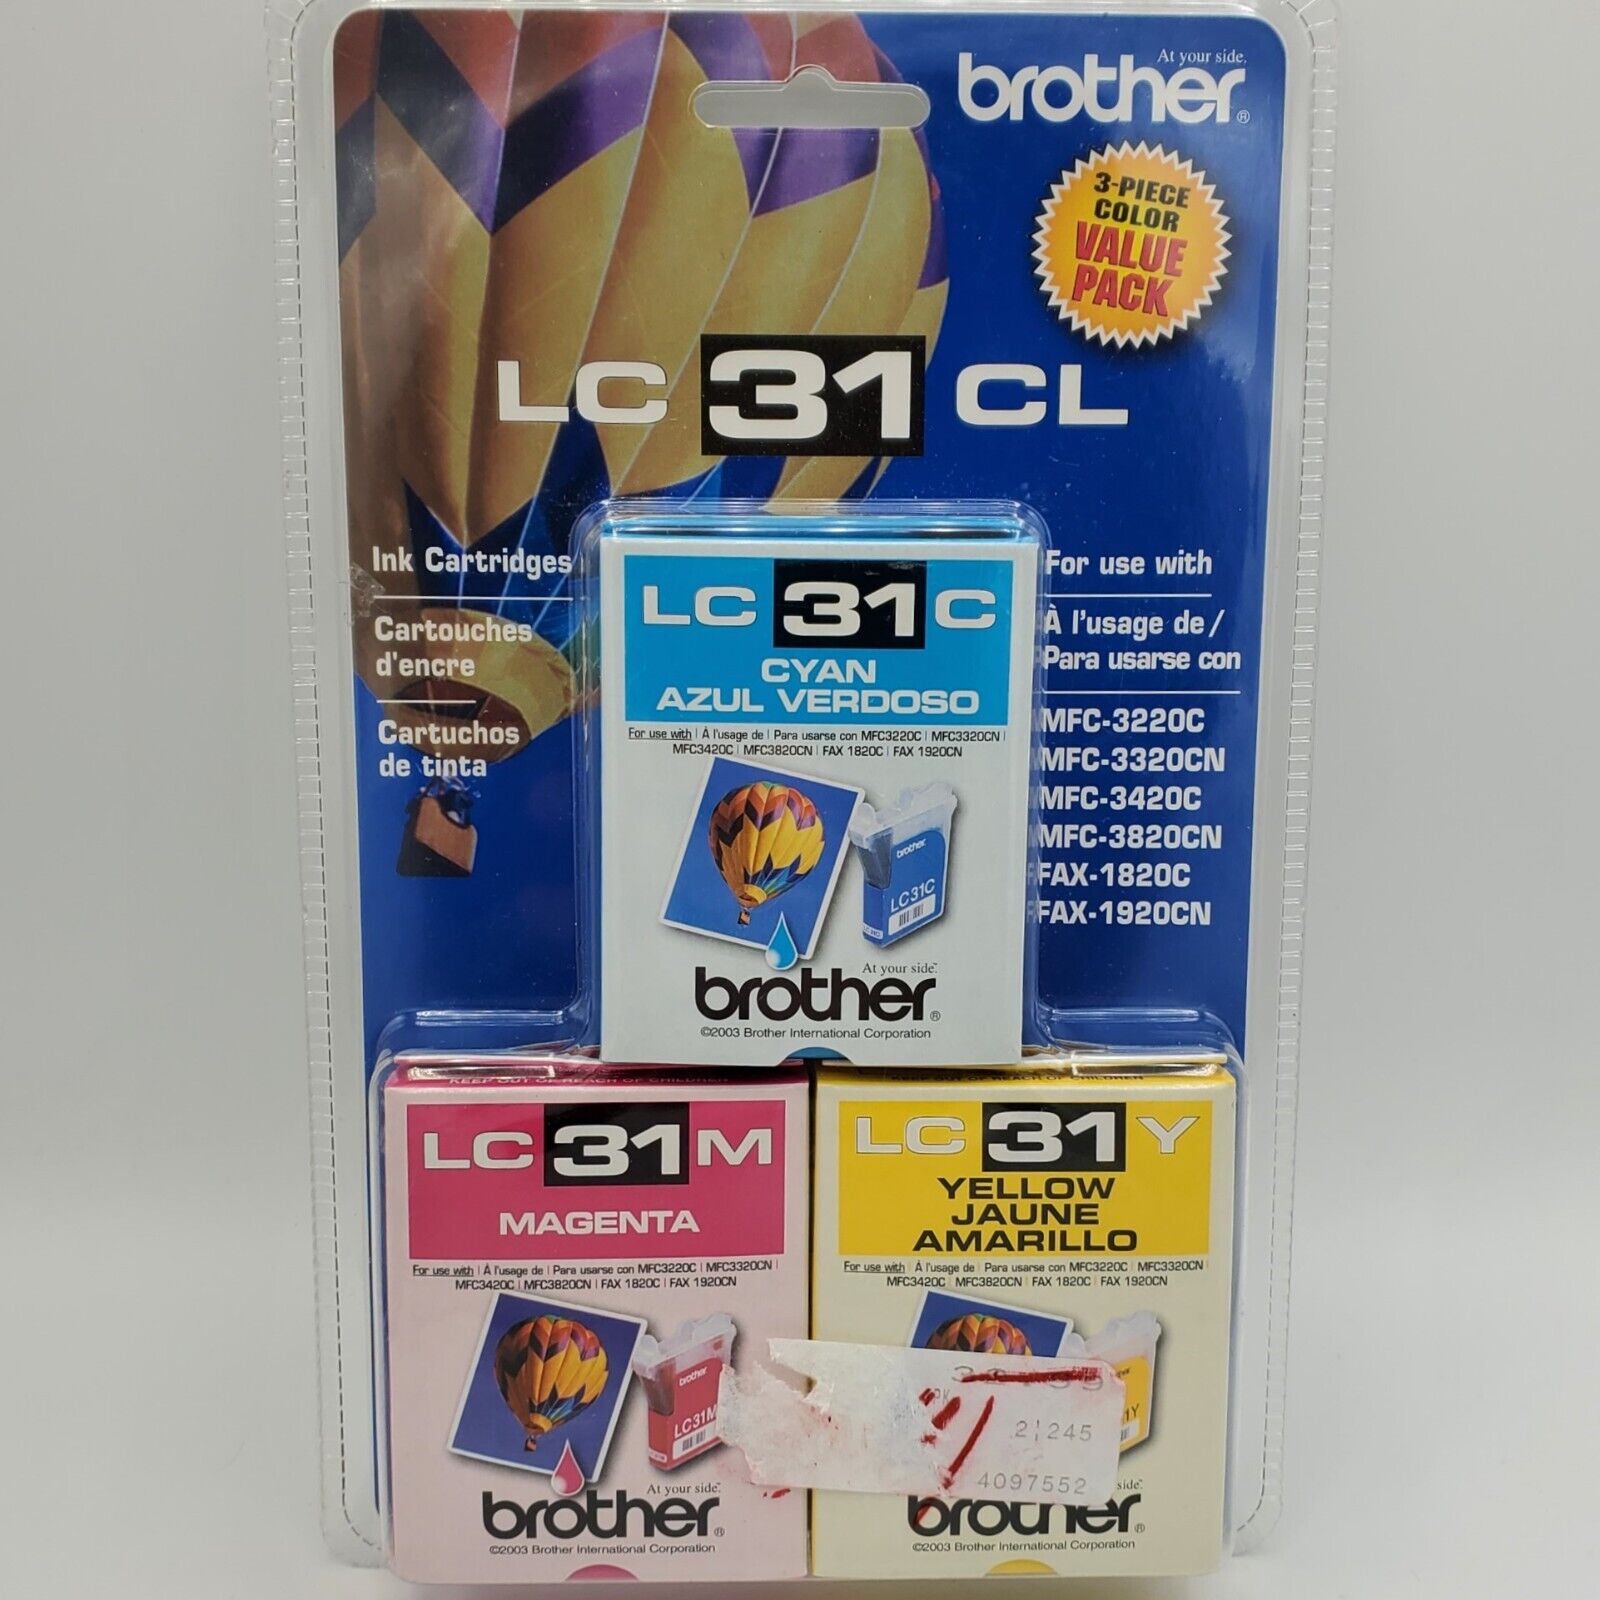 Brother LC 31 CL Ink Cartridges - Cyan, Magenta, and Yellow New sealed